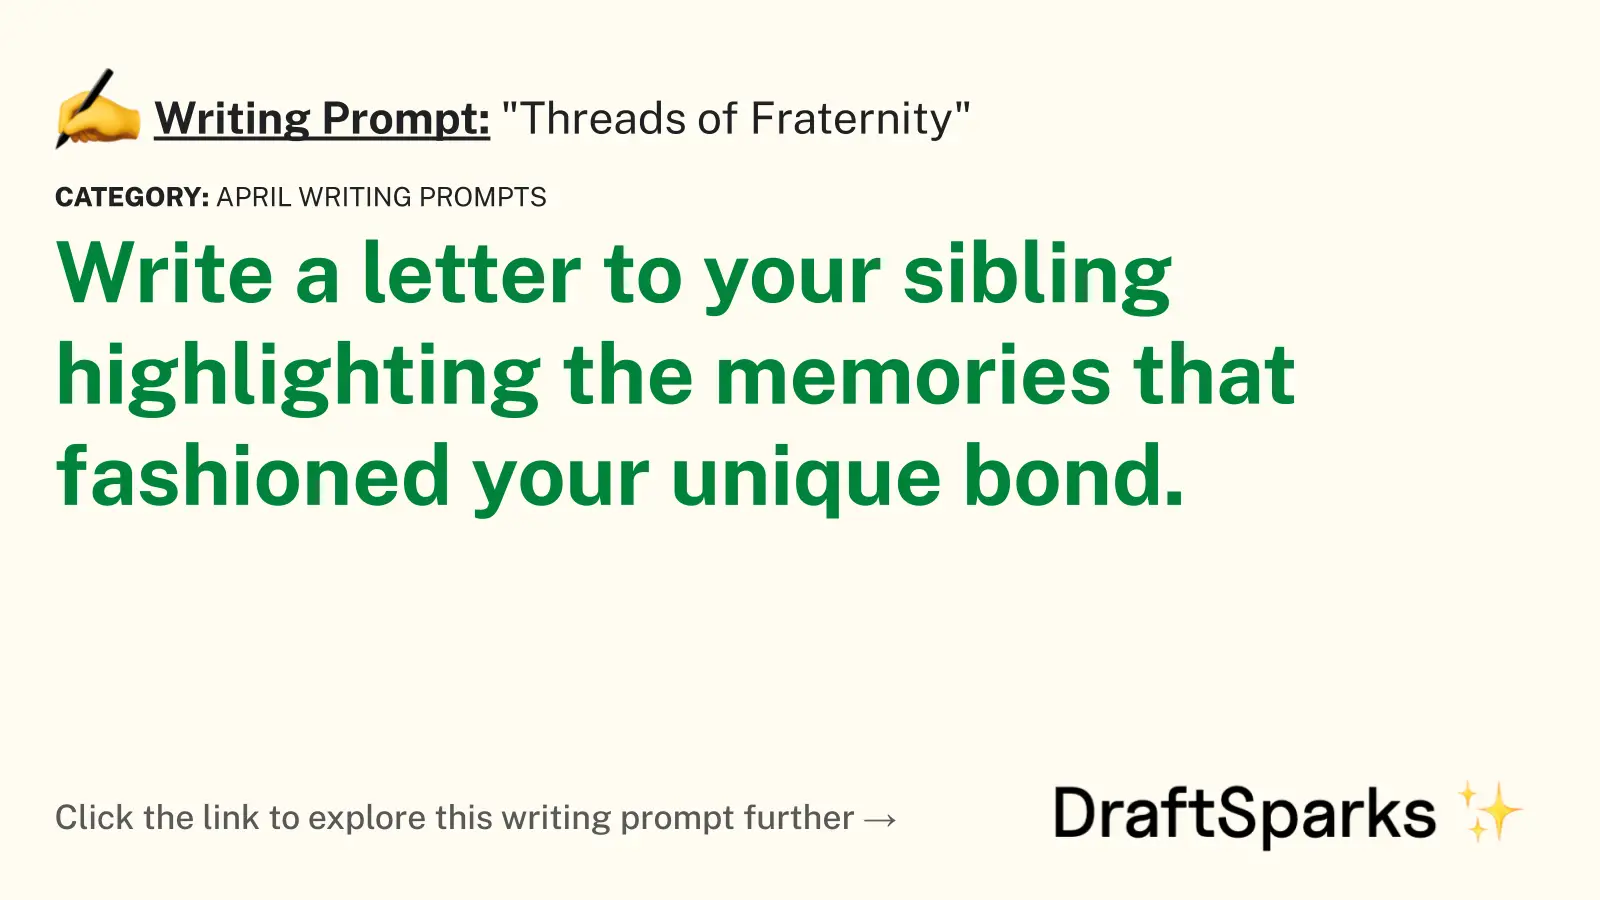 “Threads of Fraternity”